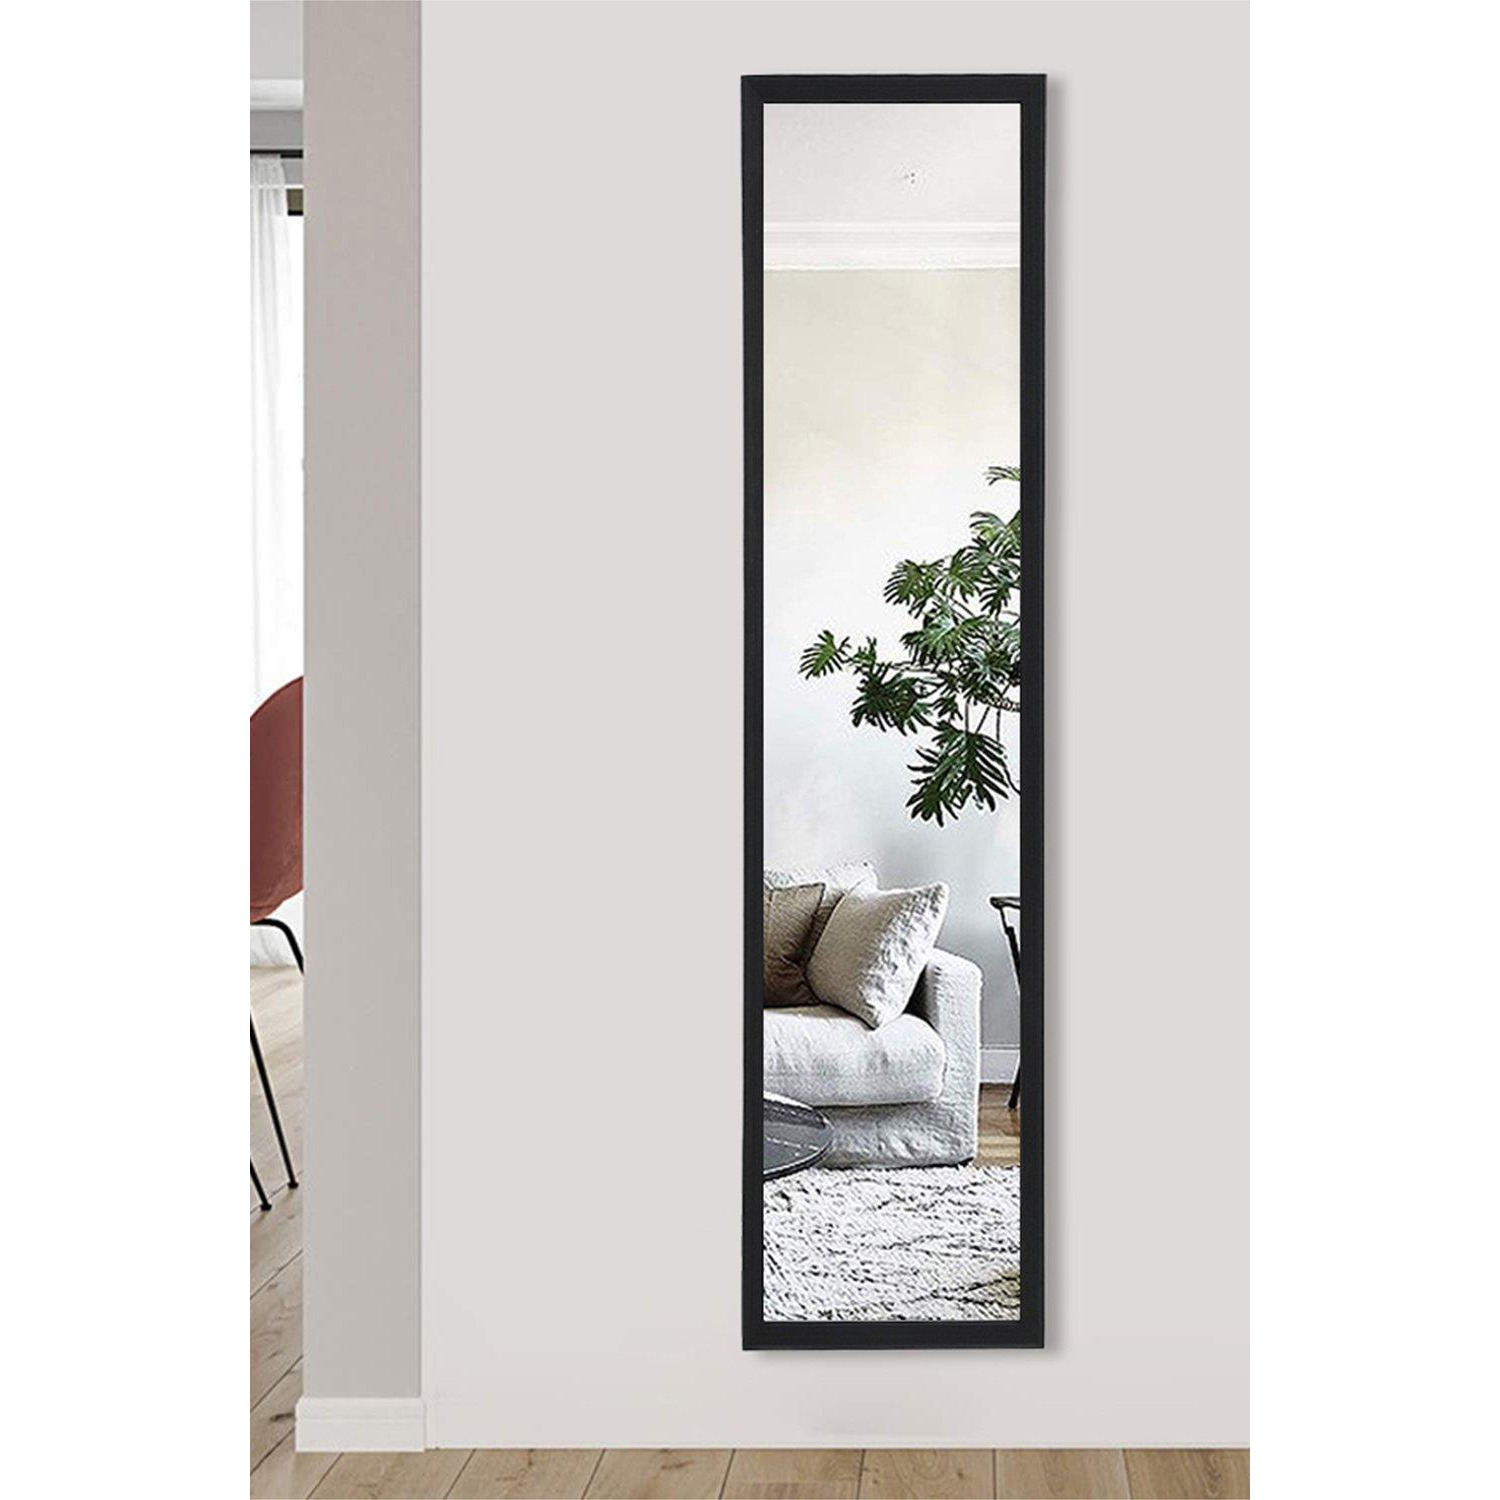 118cm x 28cm Wood Framed Rectangle Wall Mounted Mirror - image 1